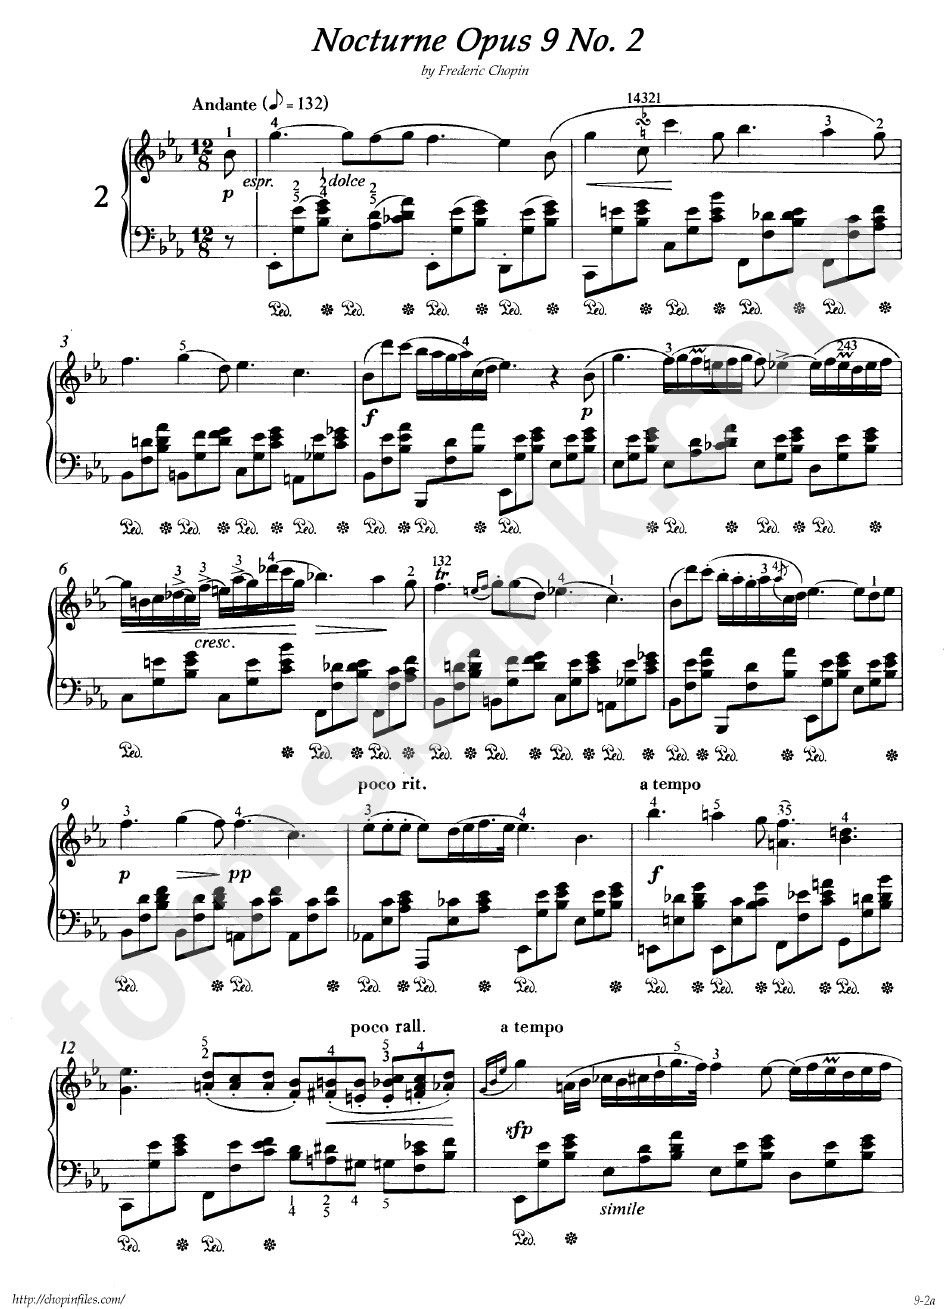 Nocturne Opus 9 No. 2 - Frederic Chopin